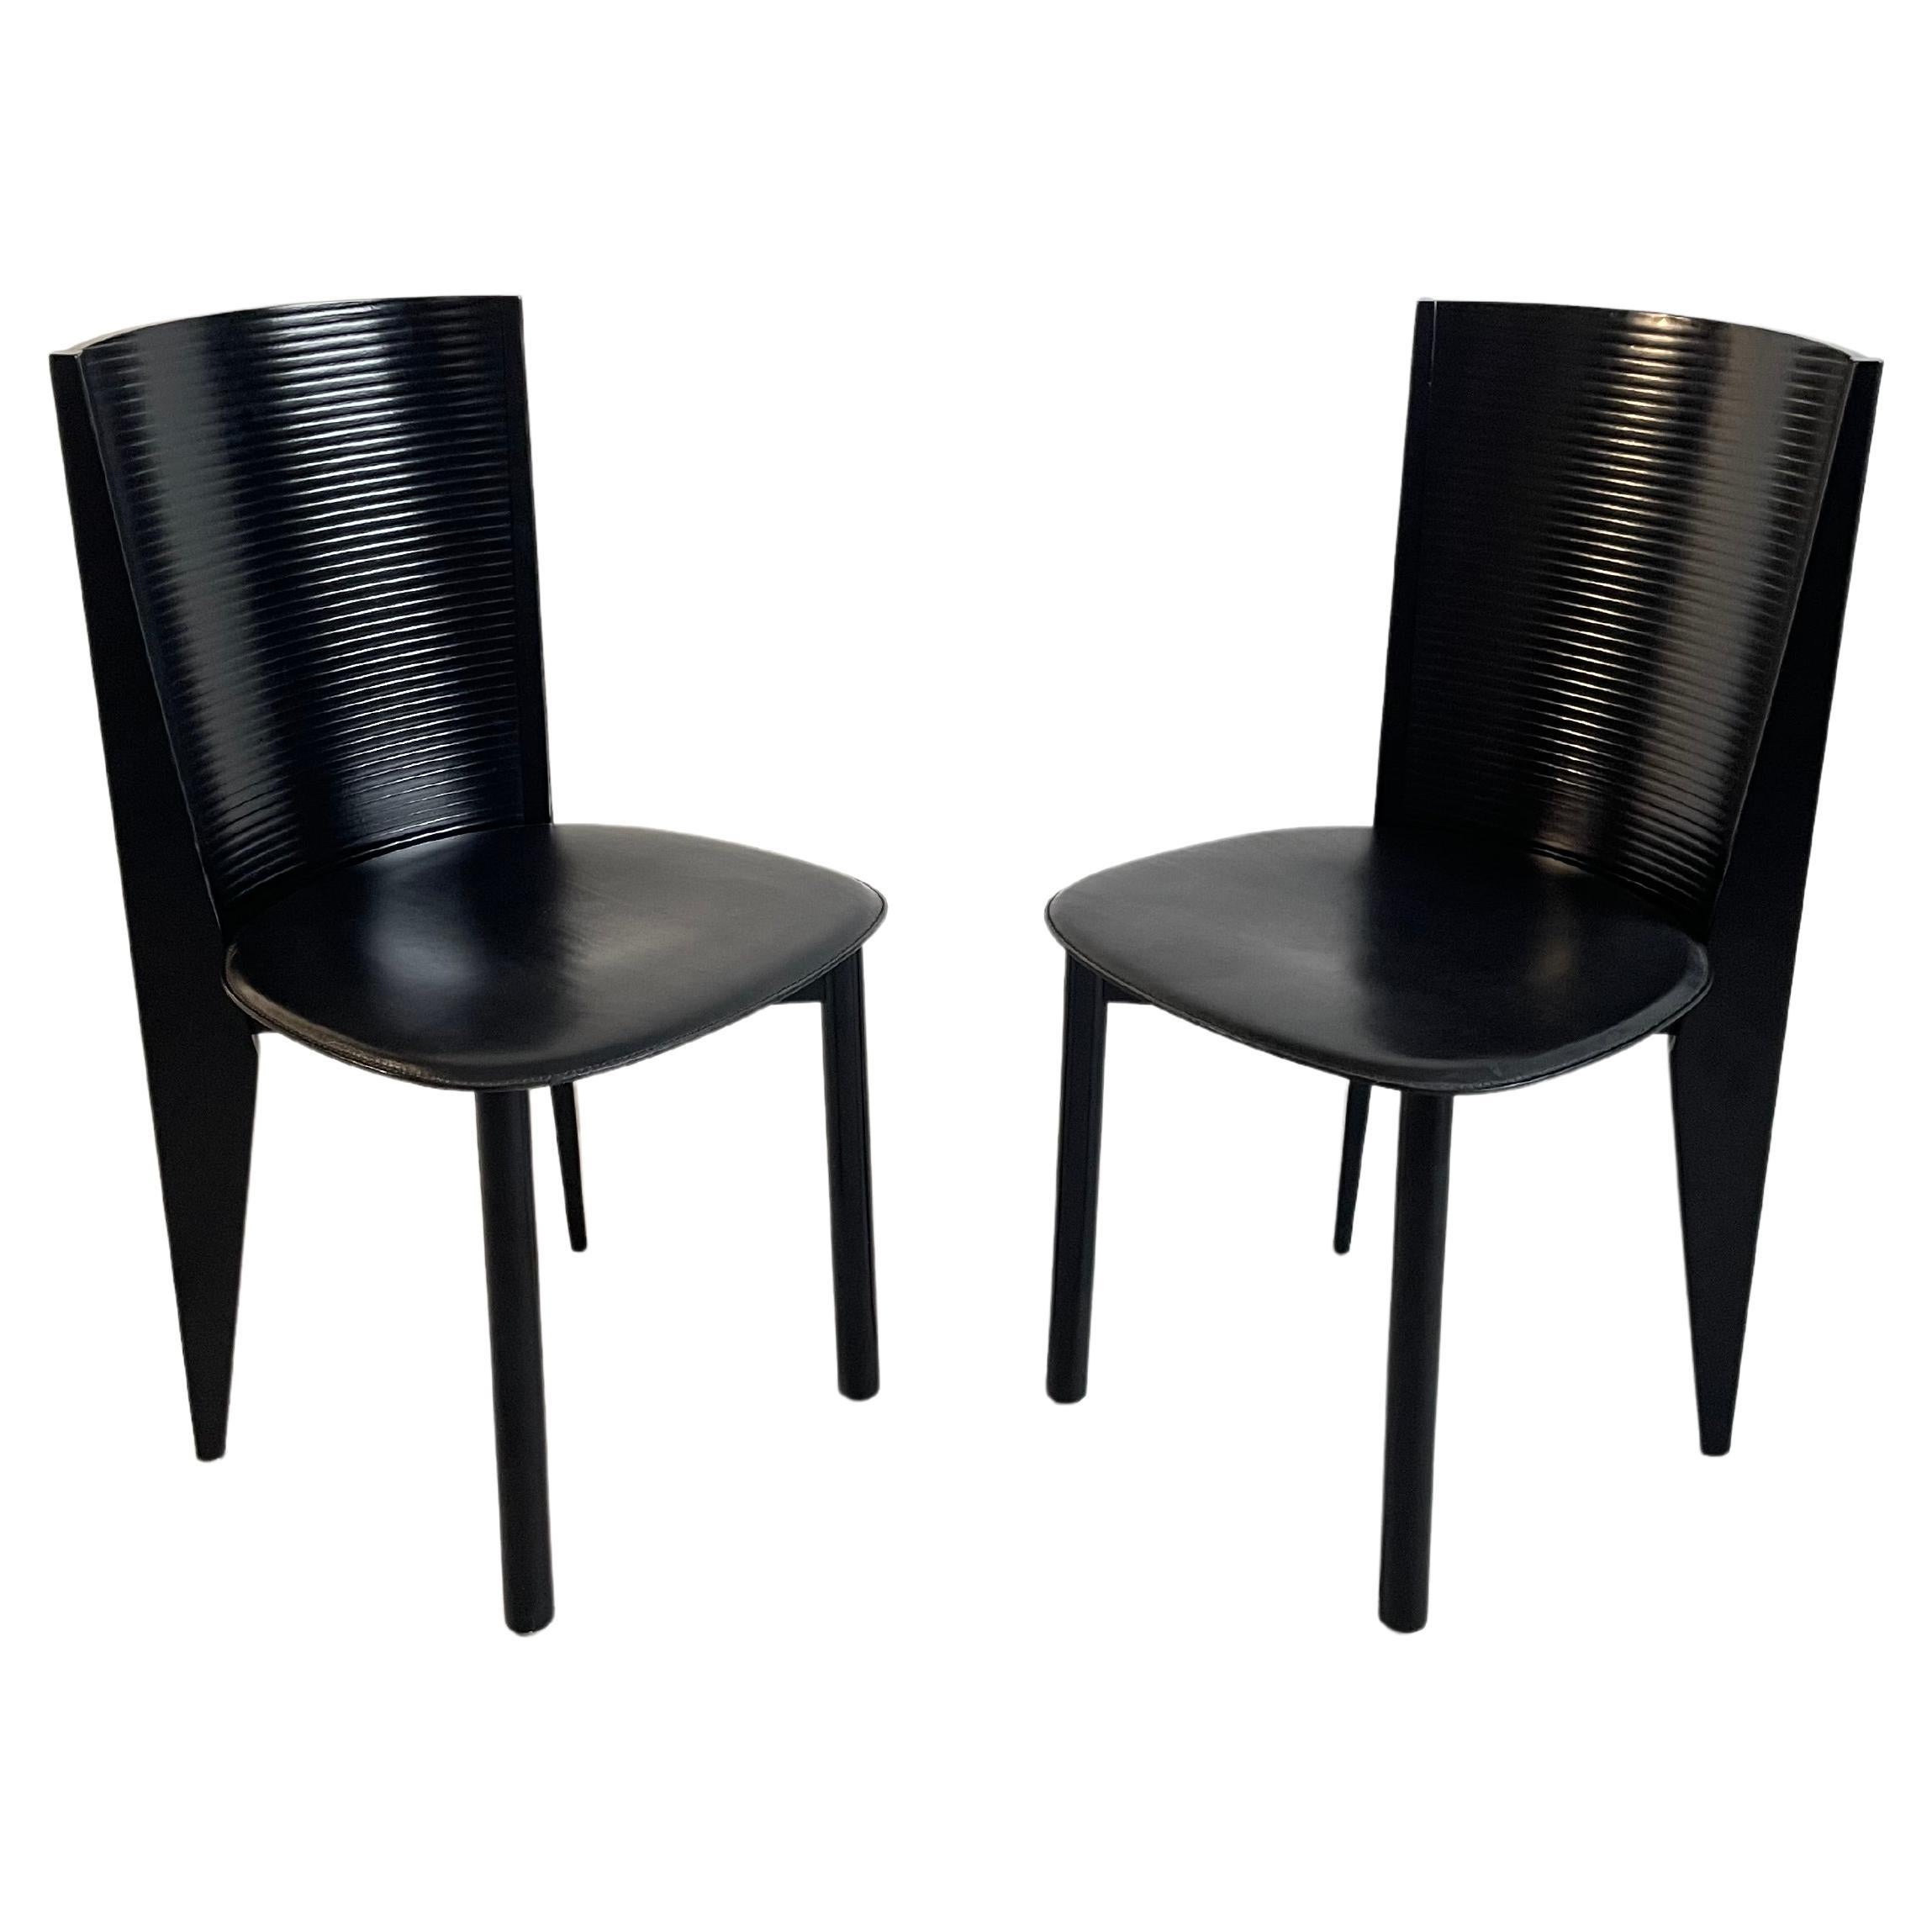 Pair of Italian Postmodern Black Wood and Leather Chairs by Calligaris, 1980s